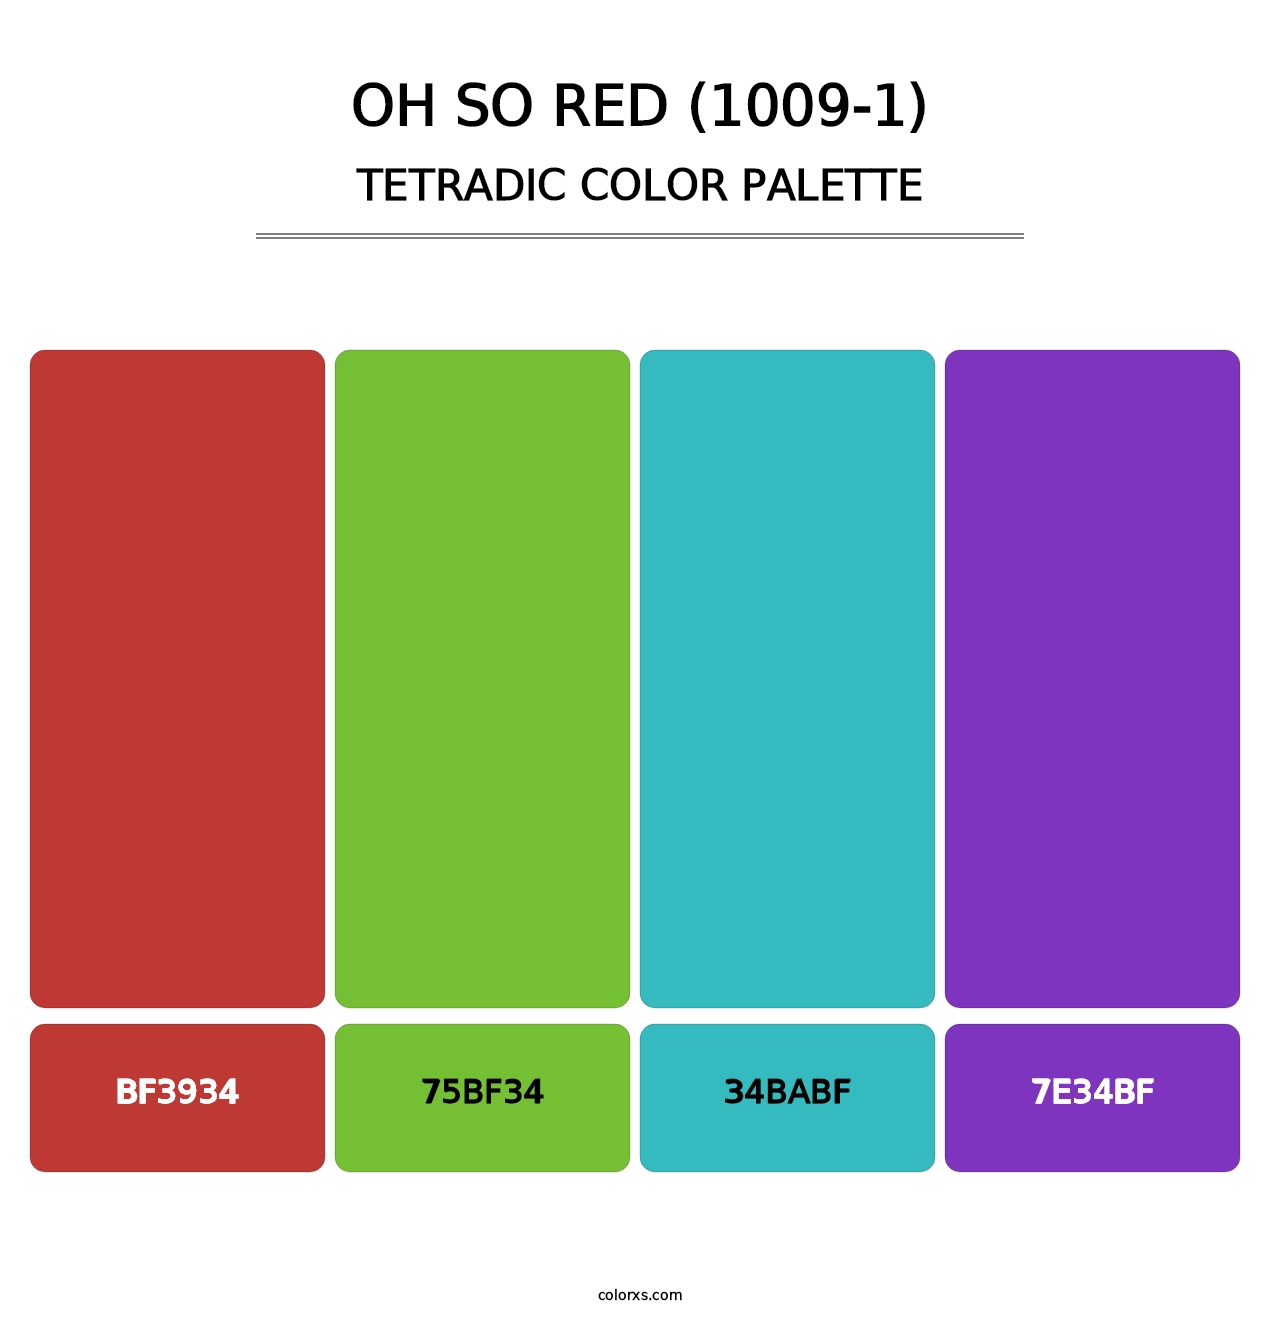 Oh So Red (1009-1) - Tetradic Color Palette